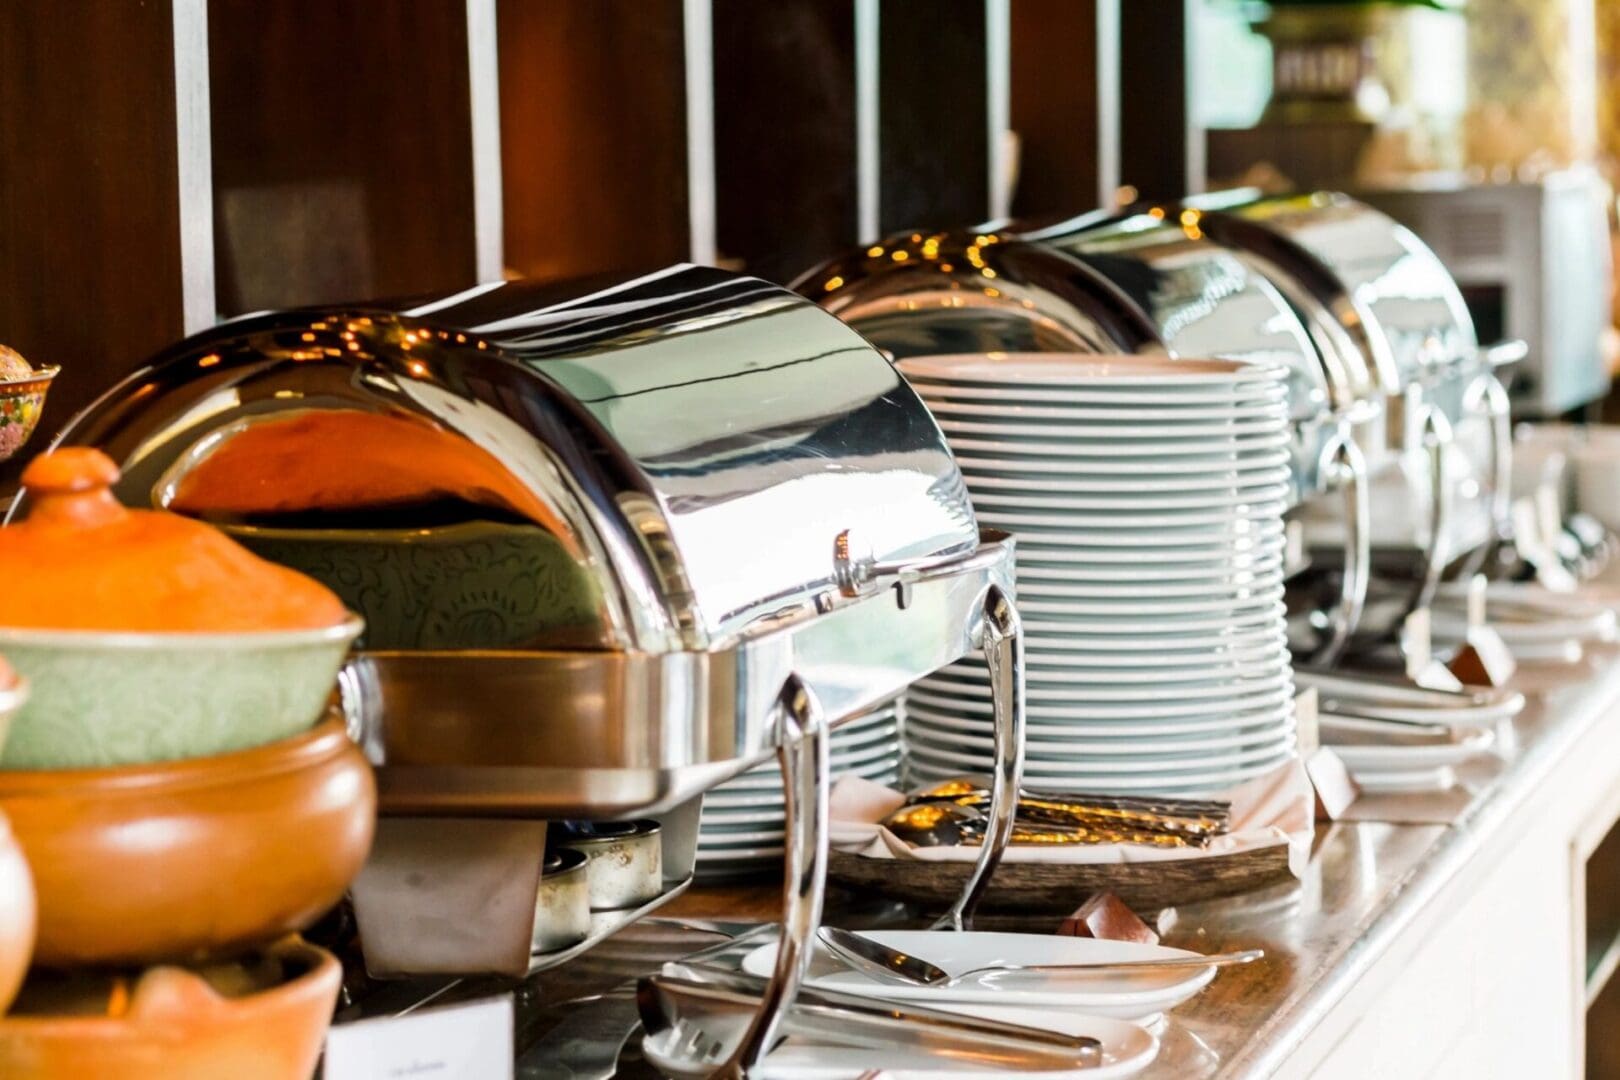 A row of metal trays and dishes on top of a counter.